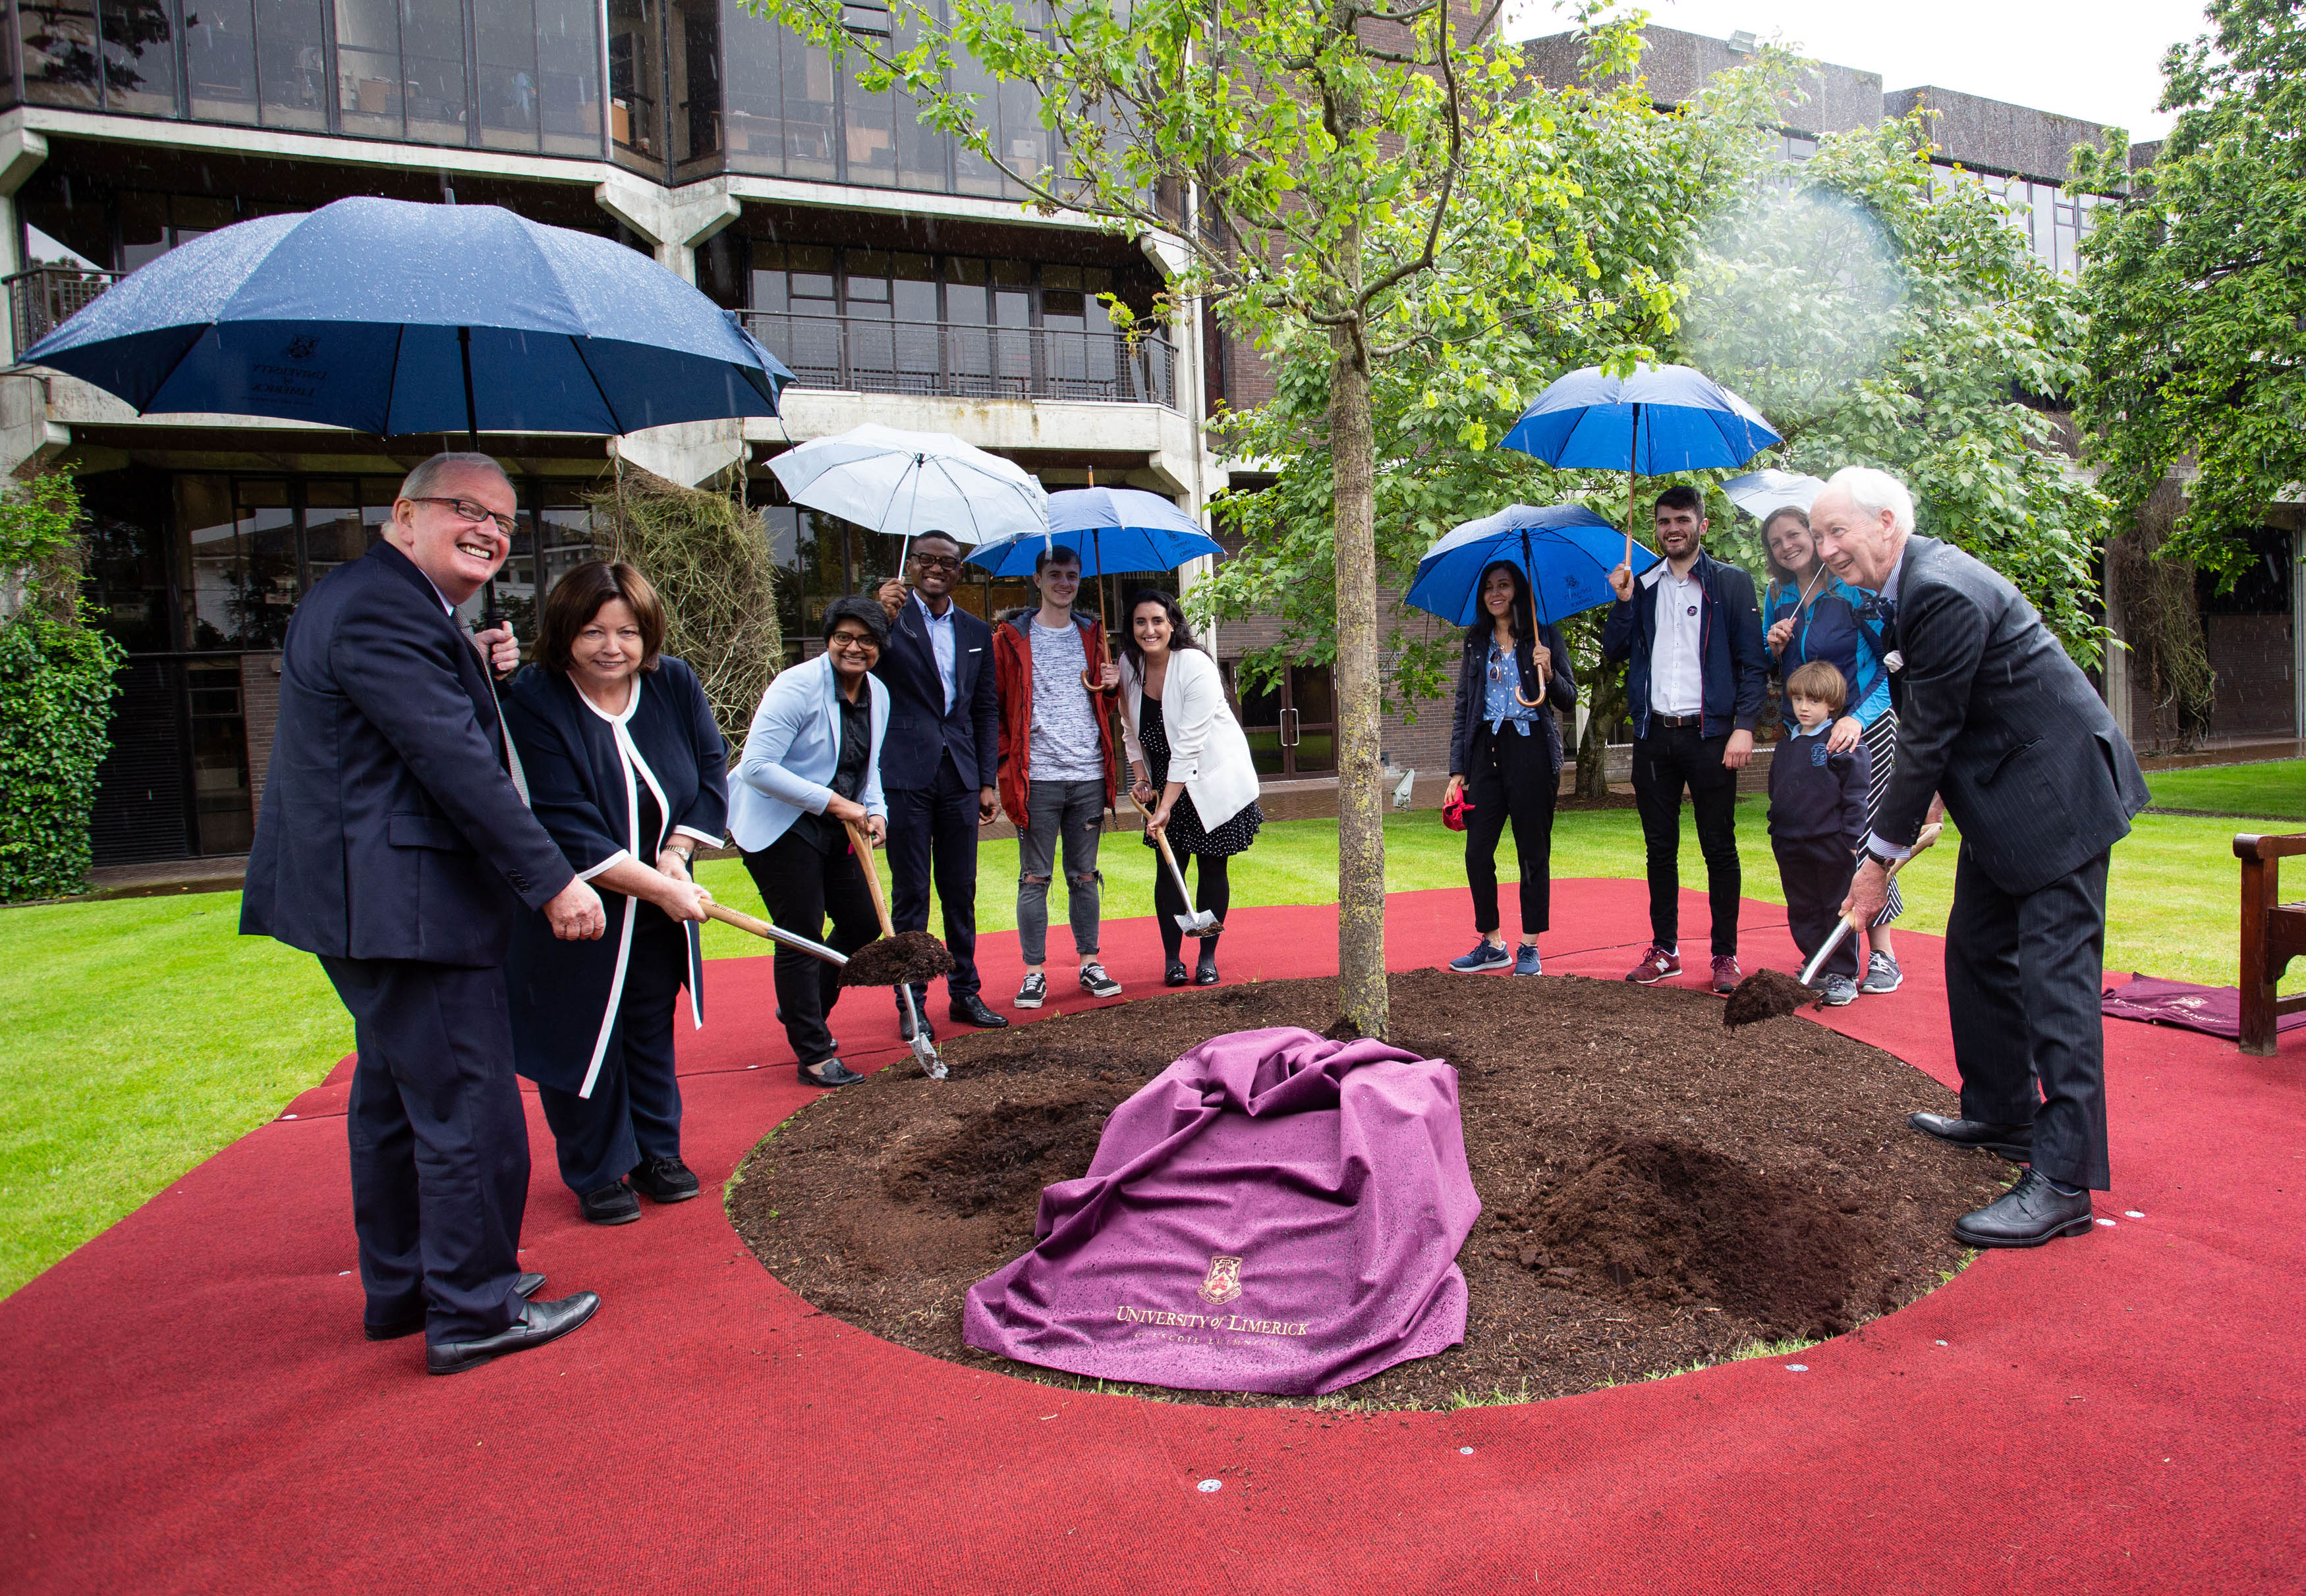 A commemorative tree planting ceremony took place in June to mark the 30th anniversary of the enactment of the University of Limerick Act 1989. Leading the planting ceremony were, Dr. Des Fitzgerald, President UL, Mary Harney, Chancellor Ul and Dr. Ed Walsh, UL Founding President. Picture: Alan Place